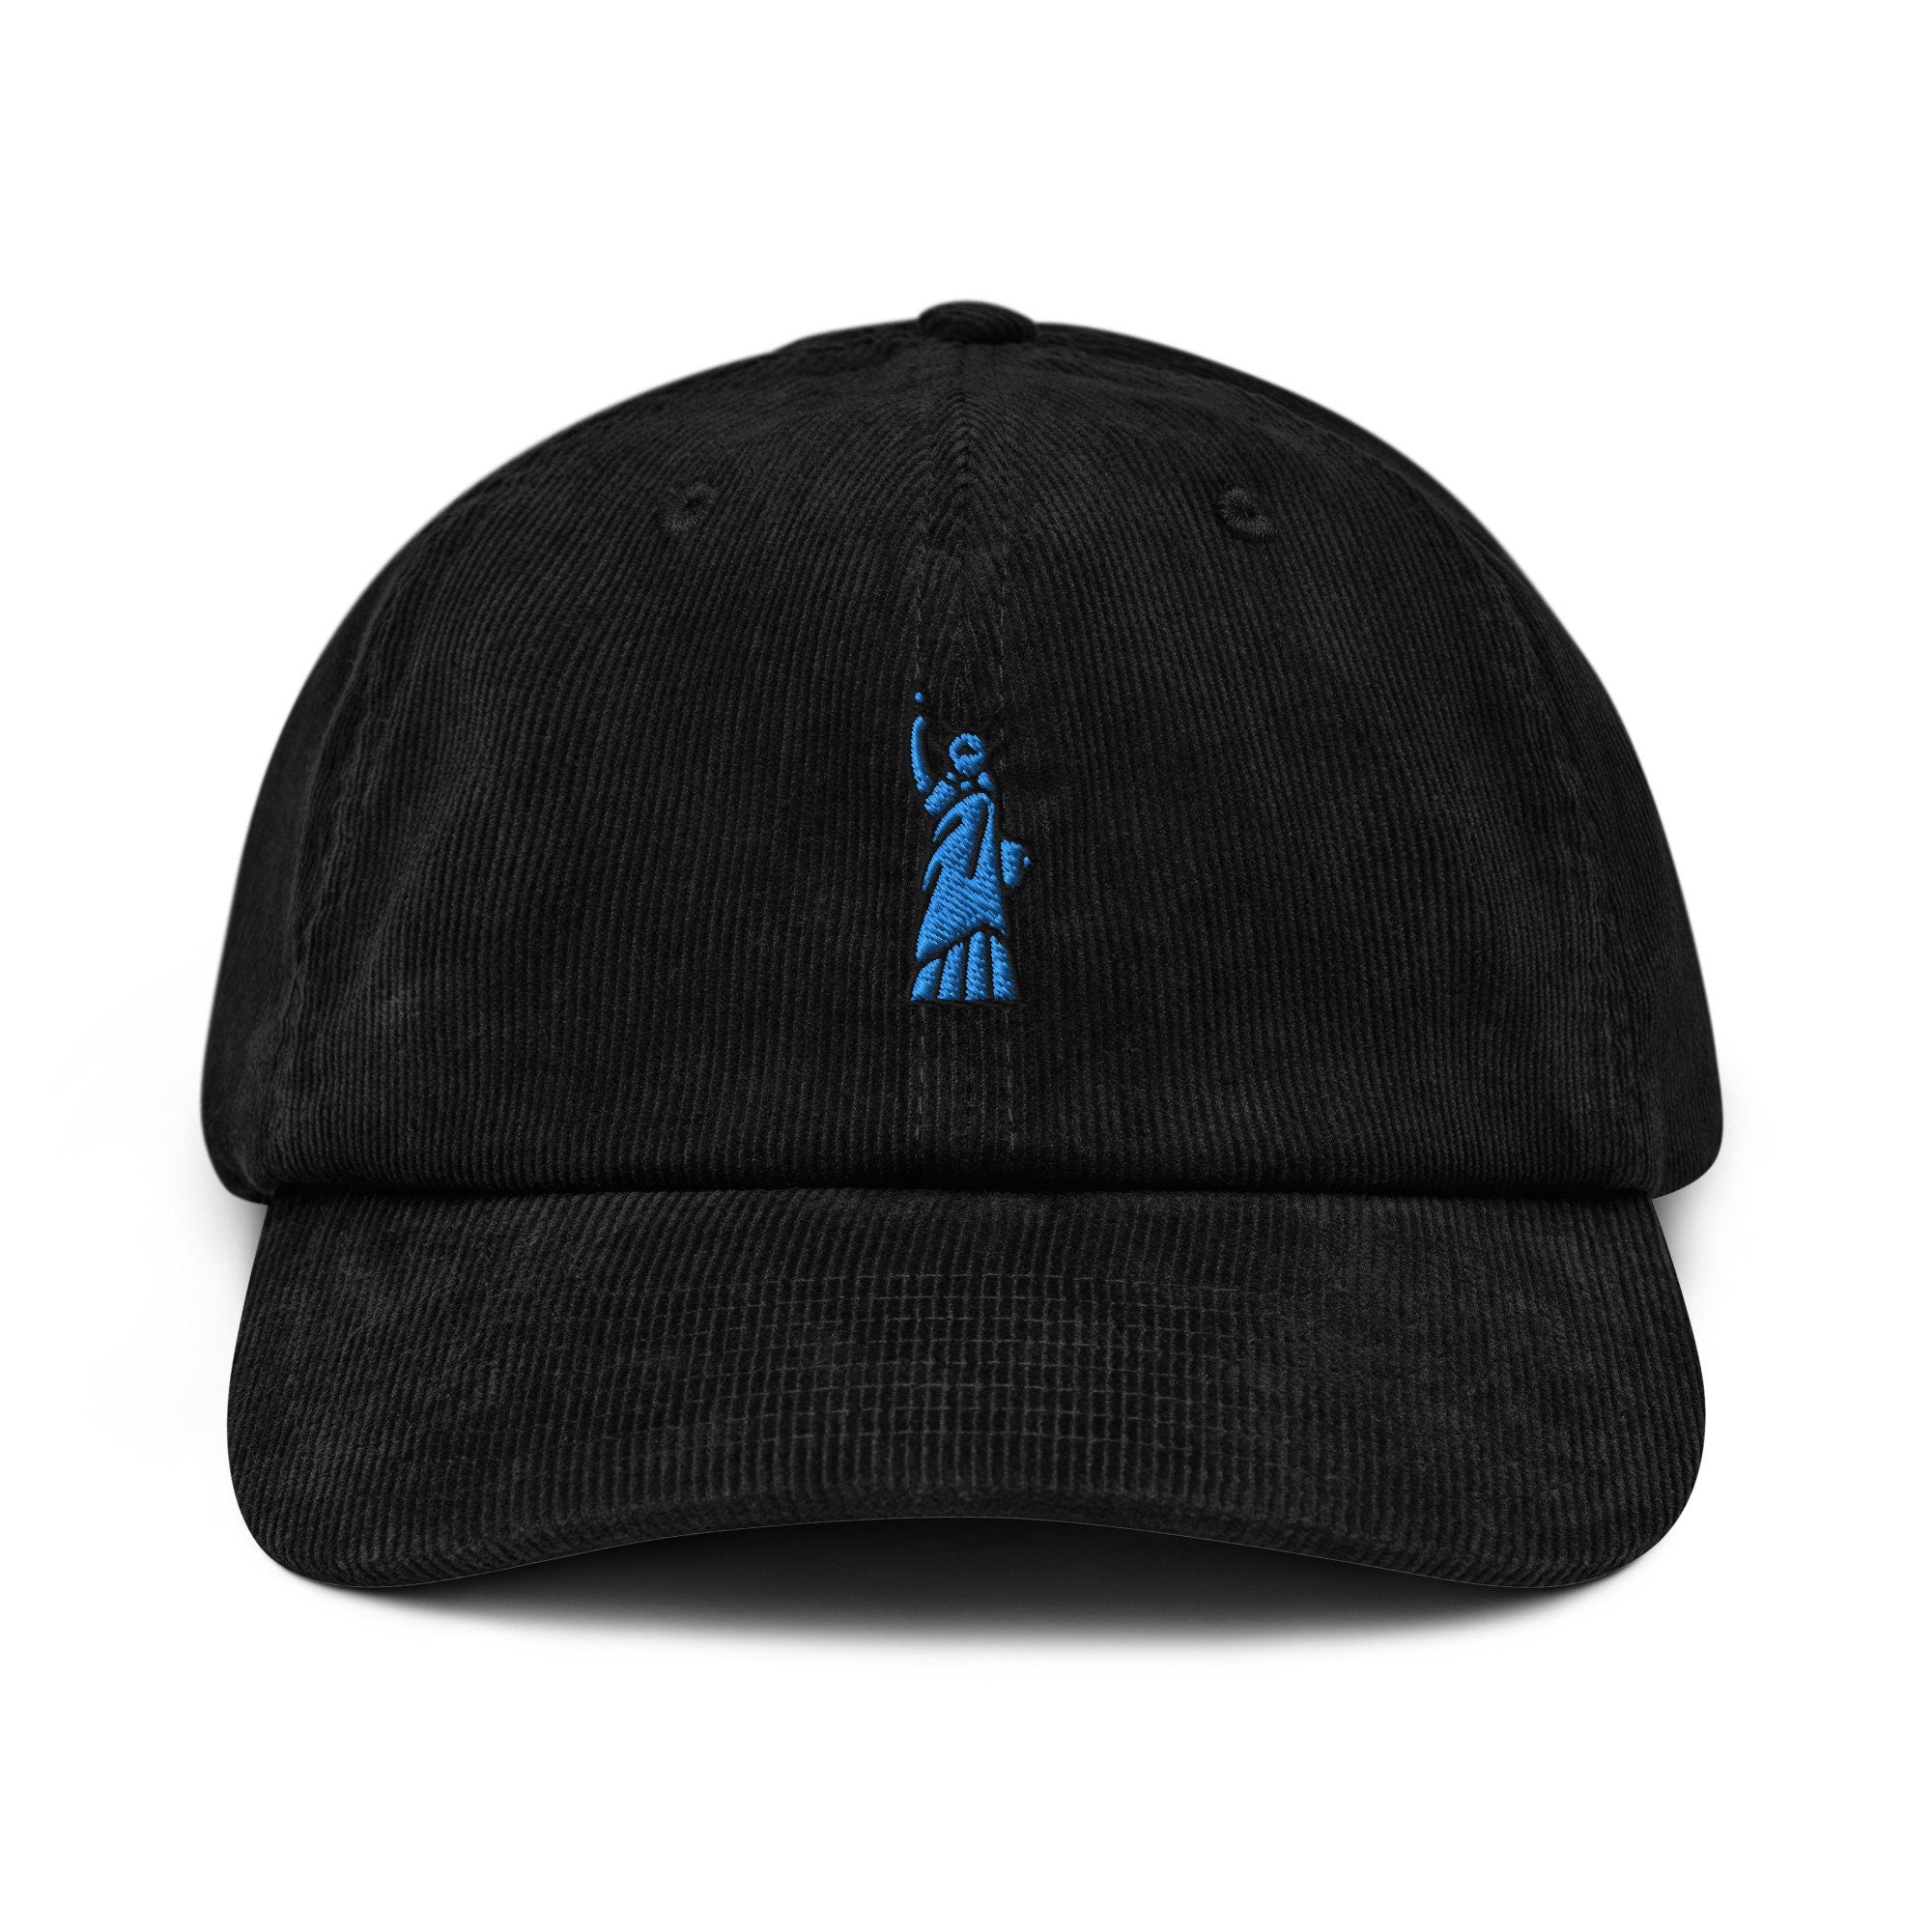 Statue of Liberty Corduroy Hat, Handmade Embroidered Corduroy Dad Cap - Multiple Colors